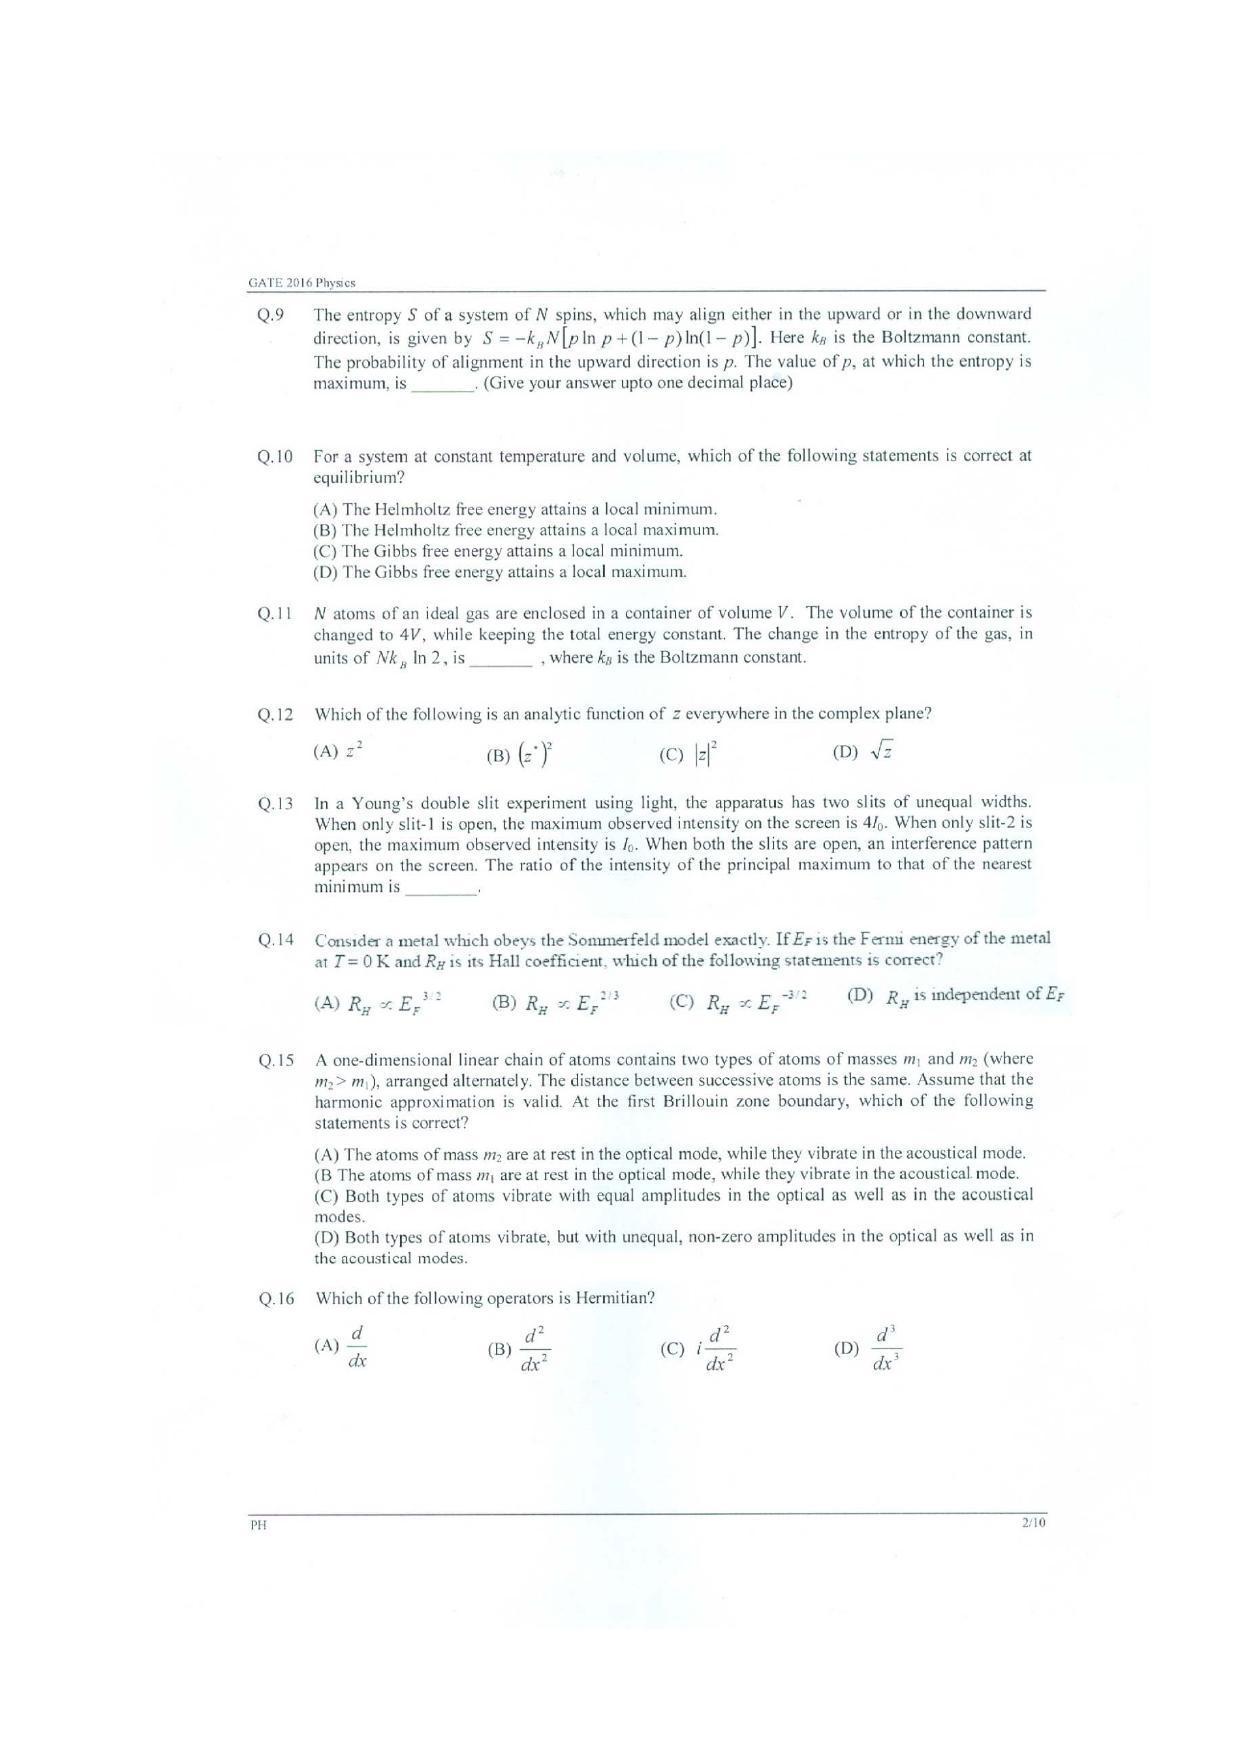 GATE 2016 Physics (PH) Question Paper with Answer Key - Page 5